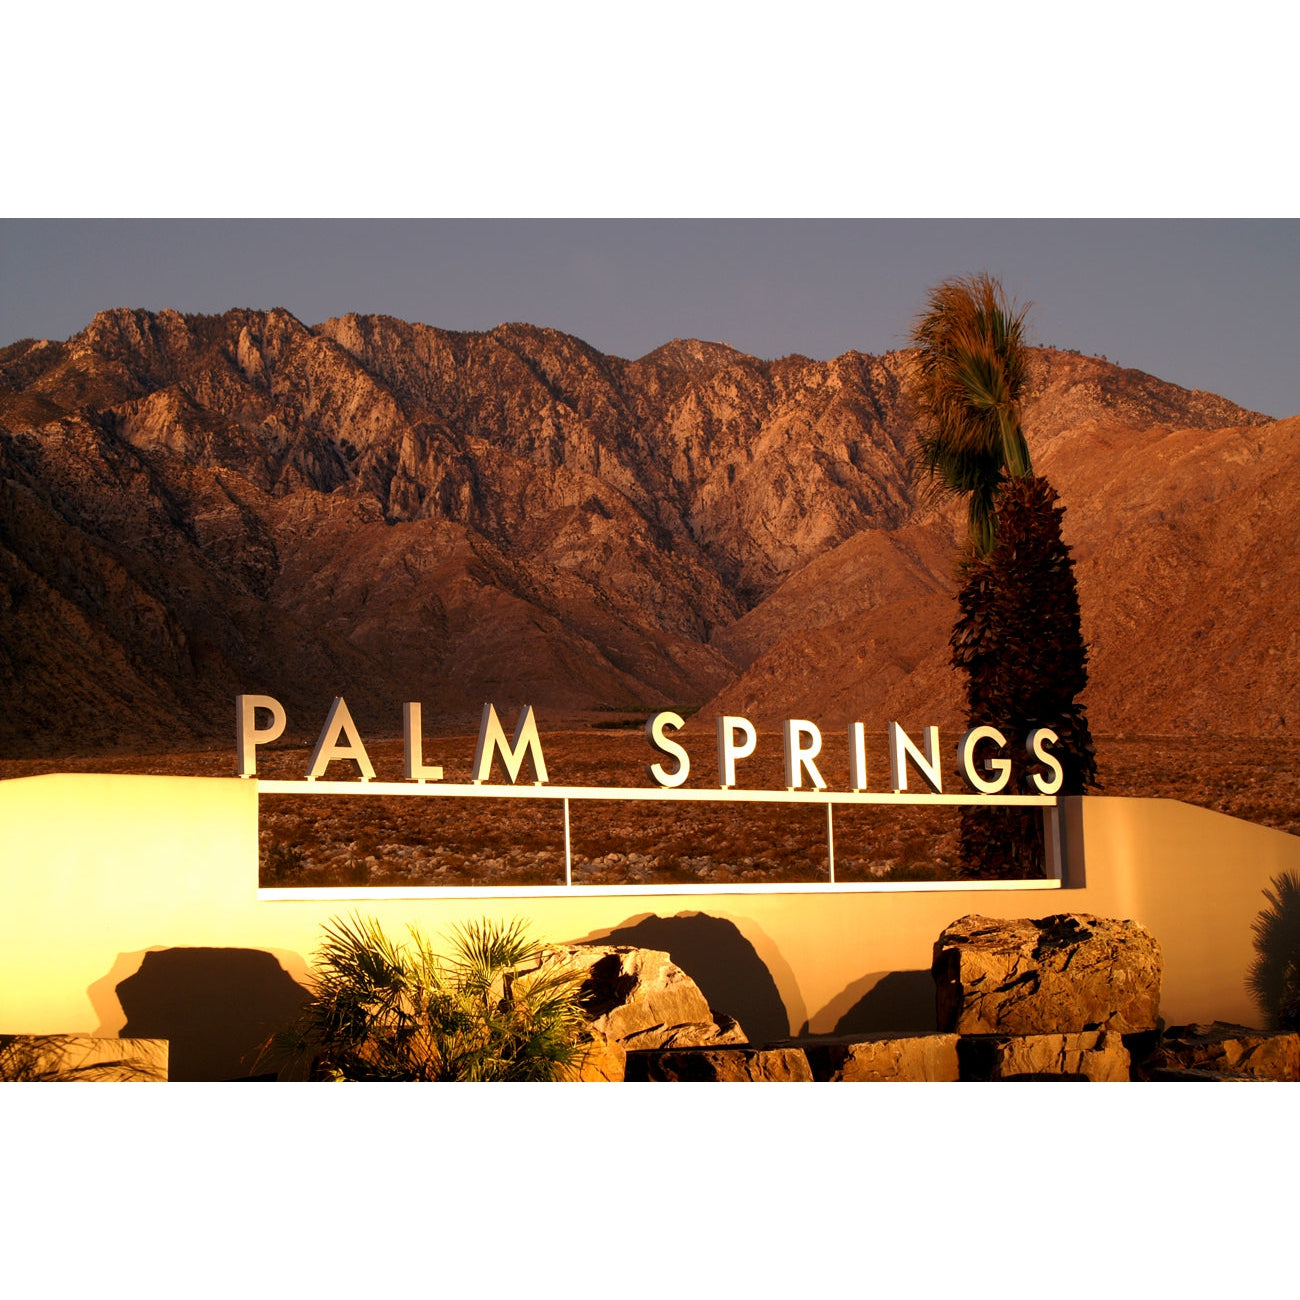 Welcome To Palm Springs - New Sign - Greeting Card